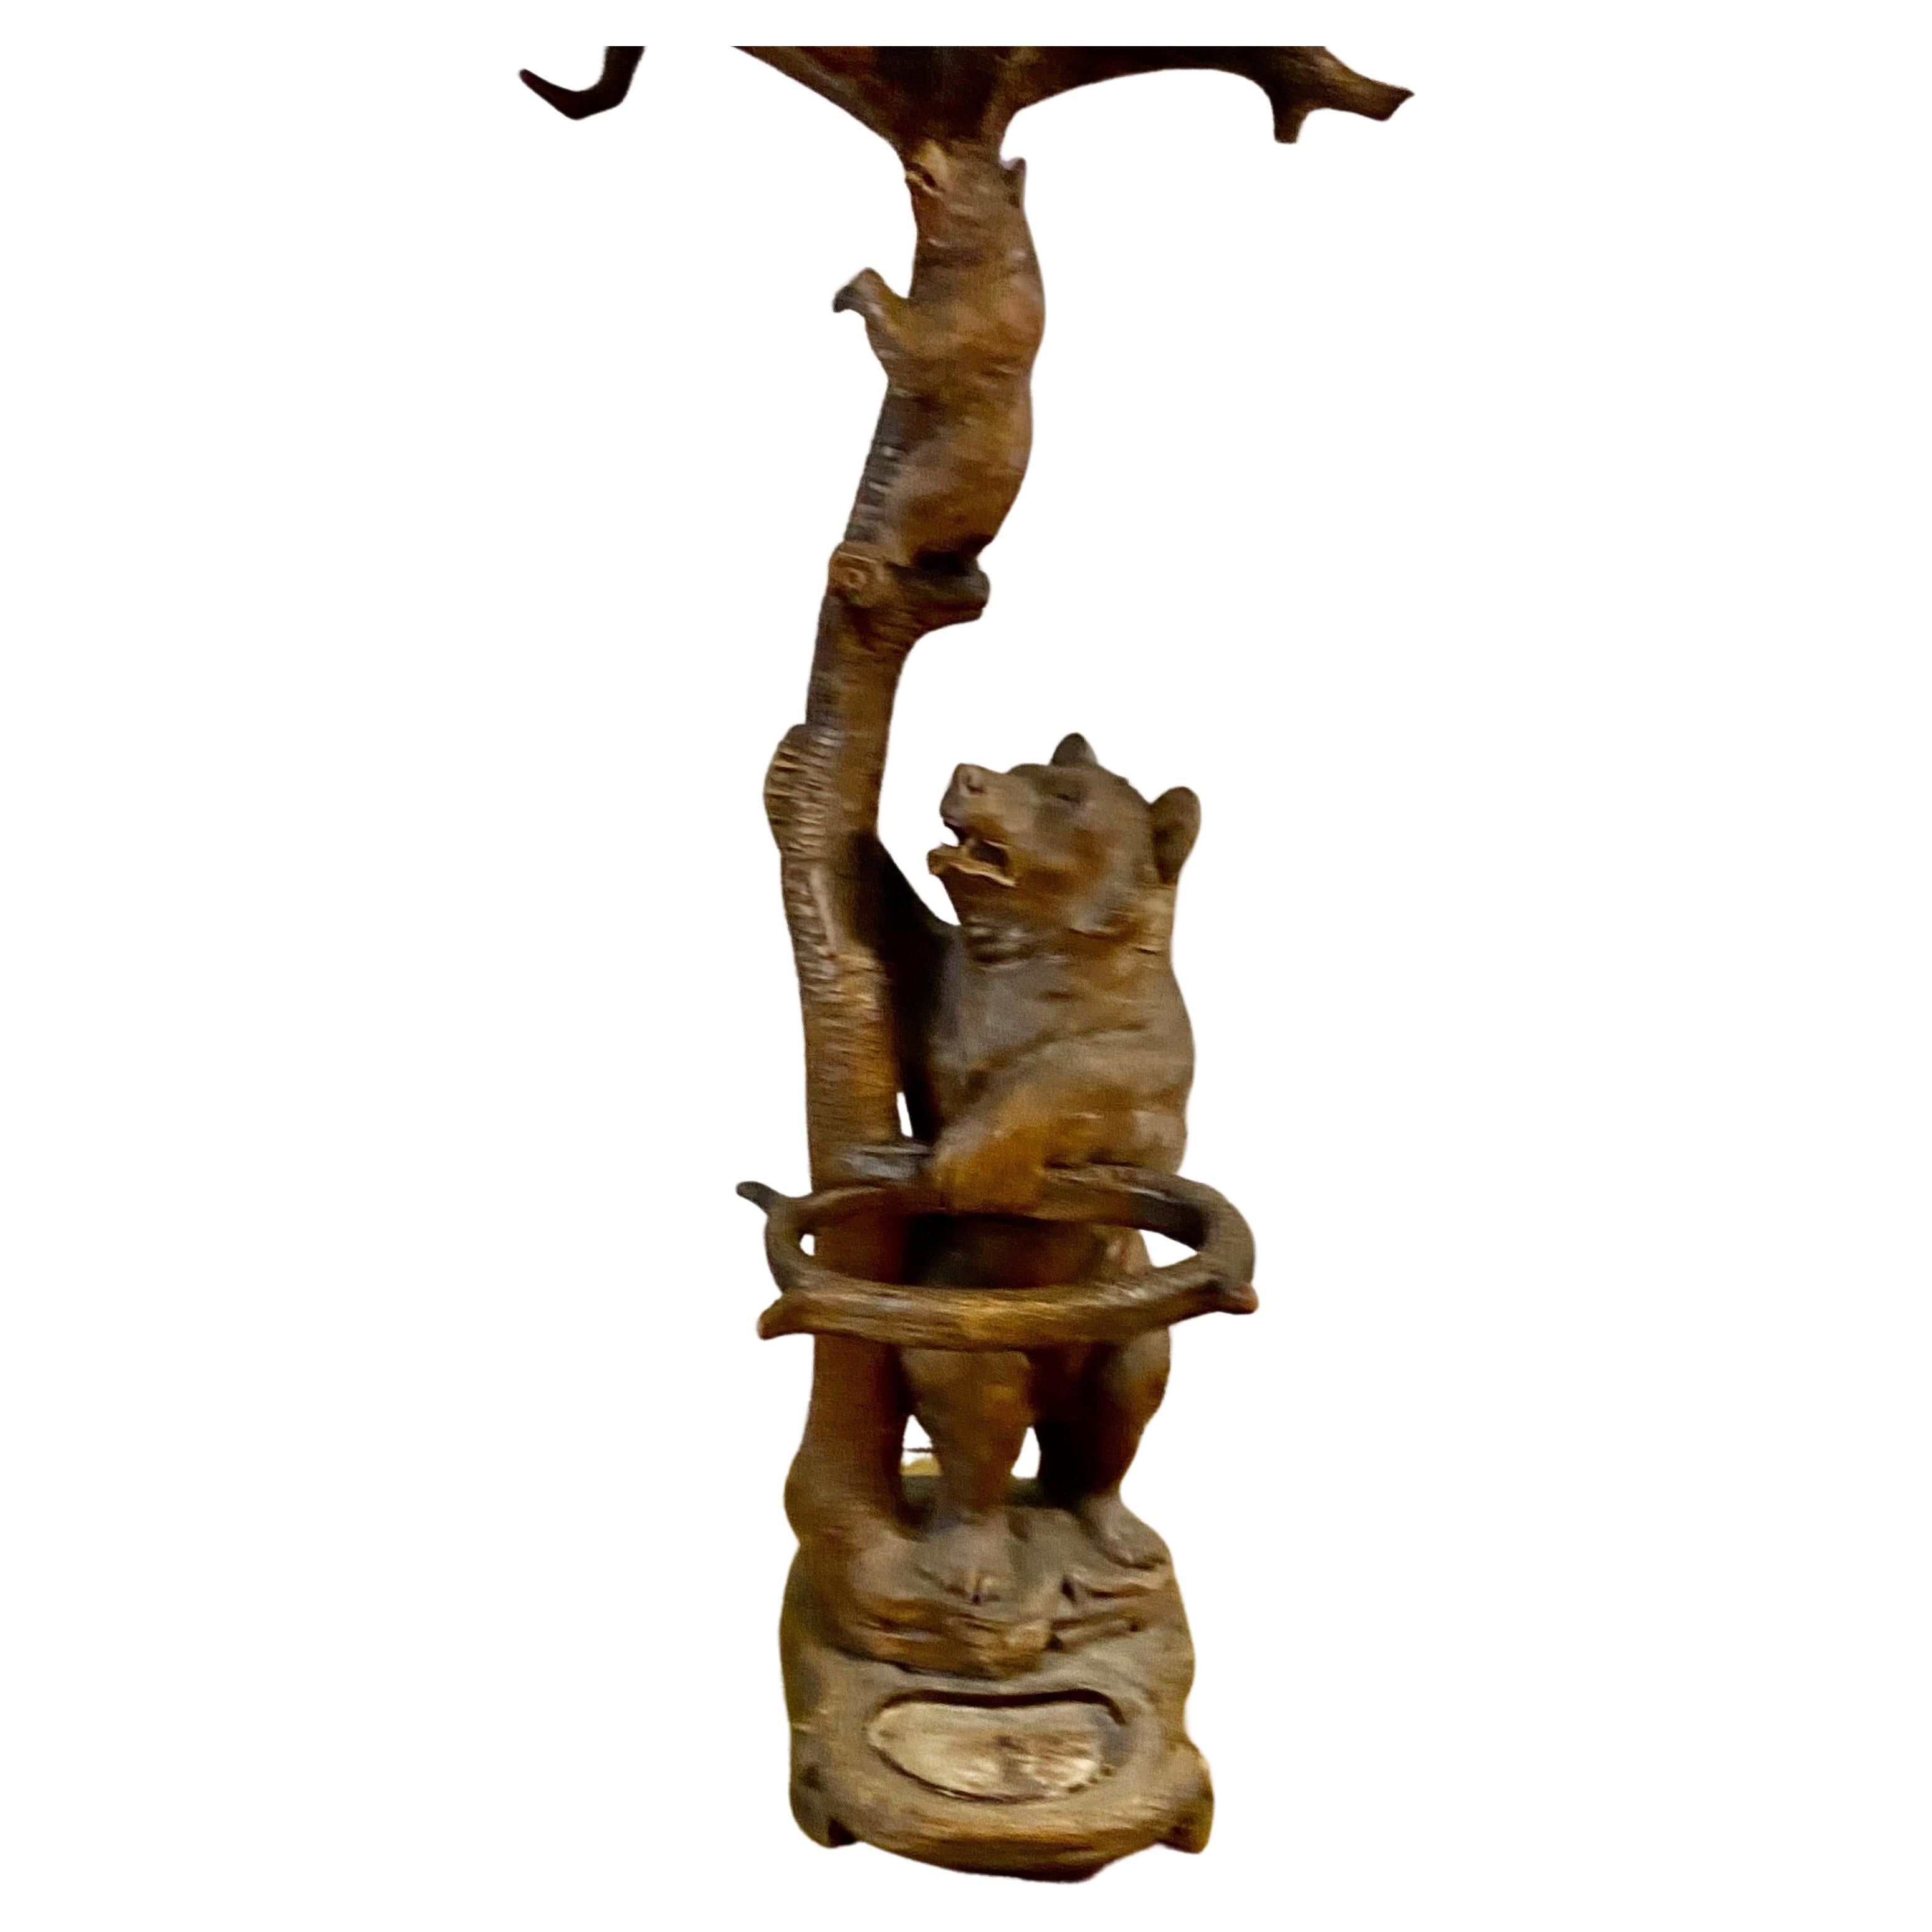 This exquisite coat stand is a true masterpiece of antique woodenware. 
Crafted from high-quality wood, this coat stand features three beautifully carved bear figures, showcasing the intricate style of the Black Forest period.
With its impressive